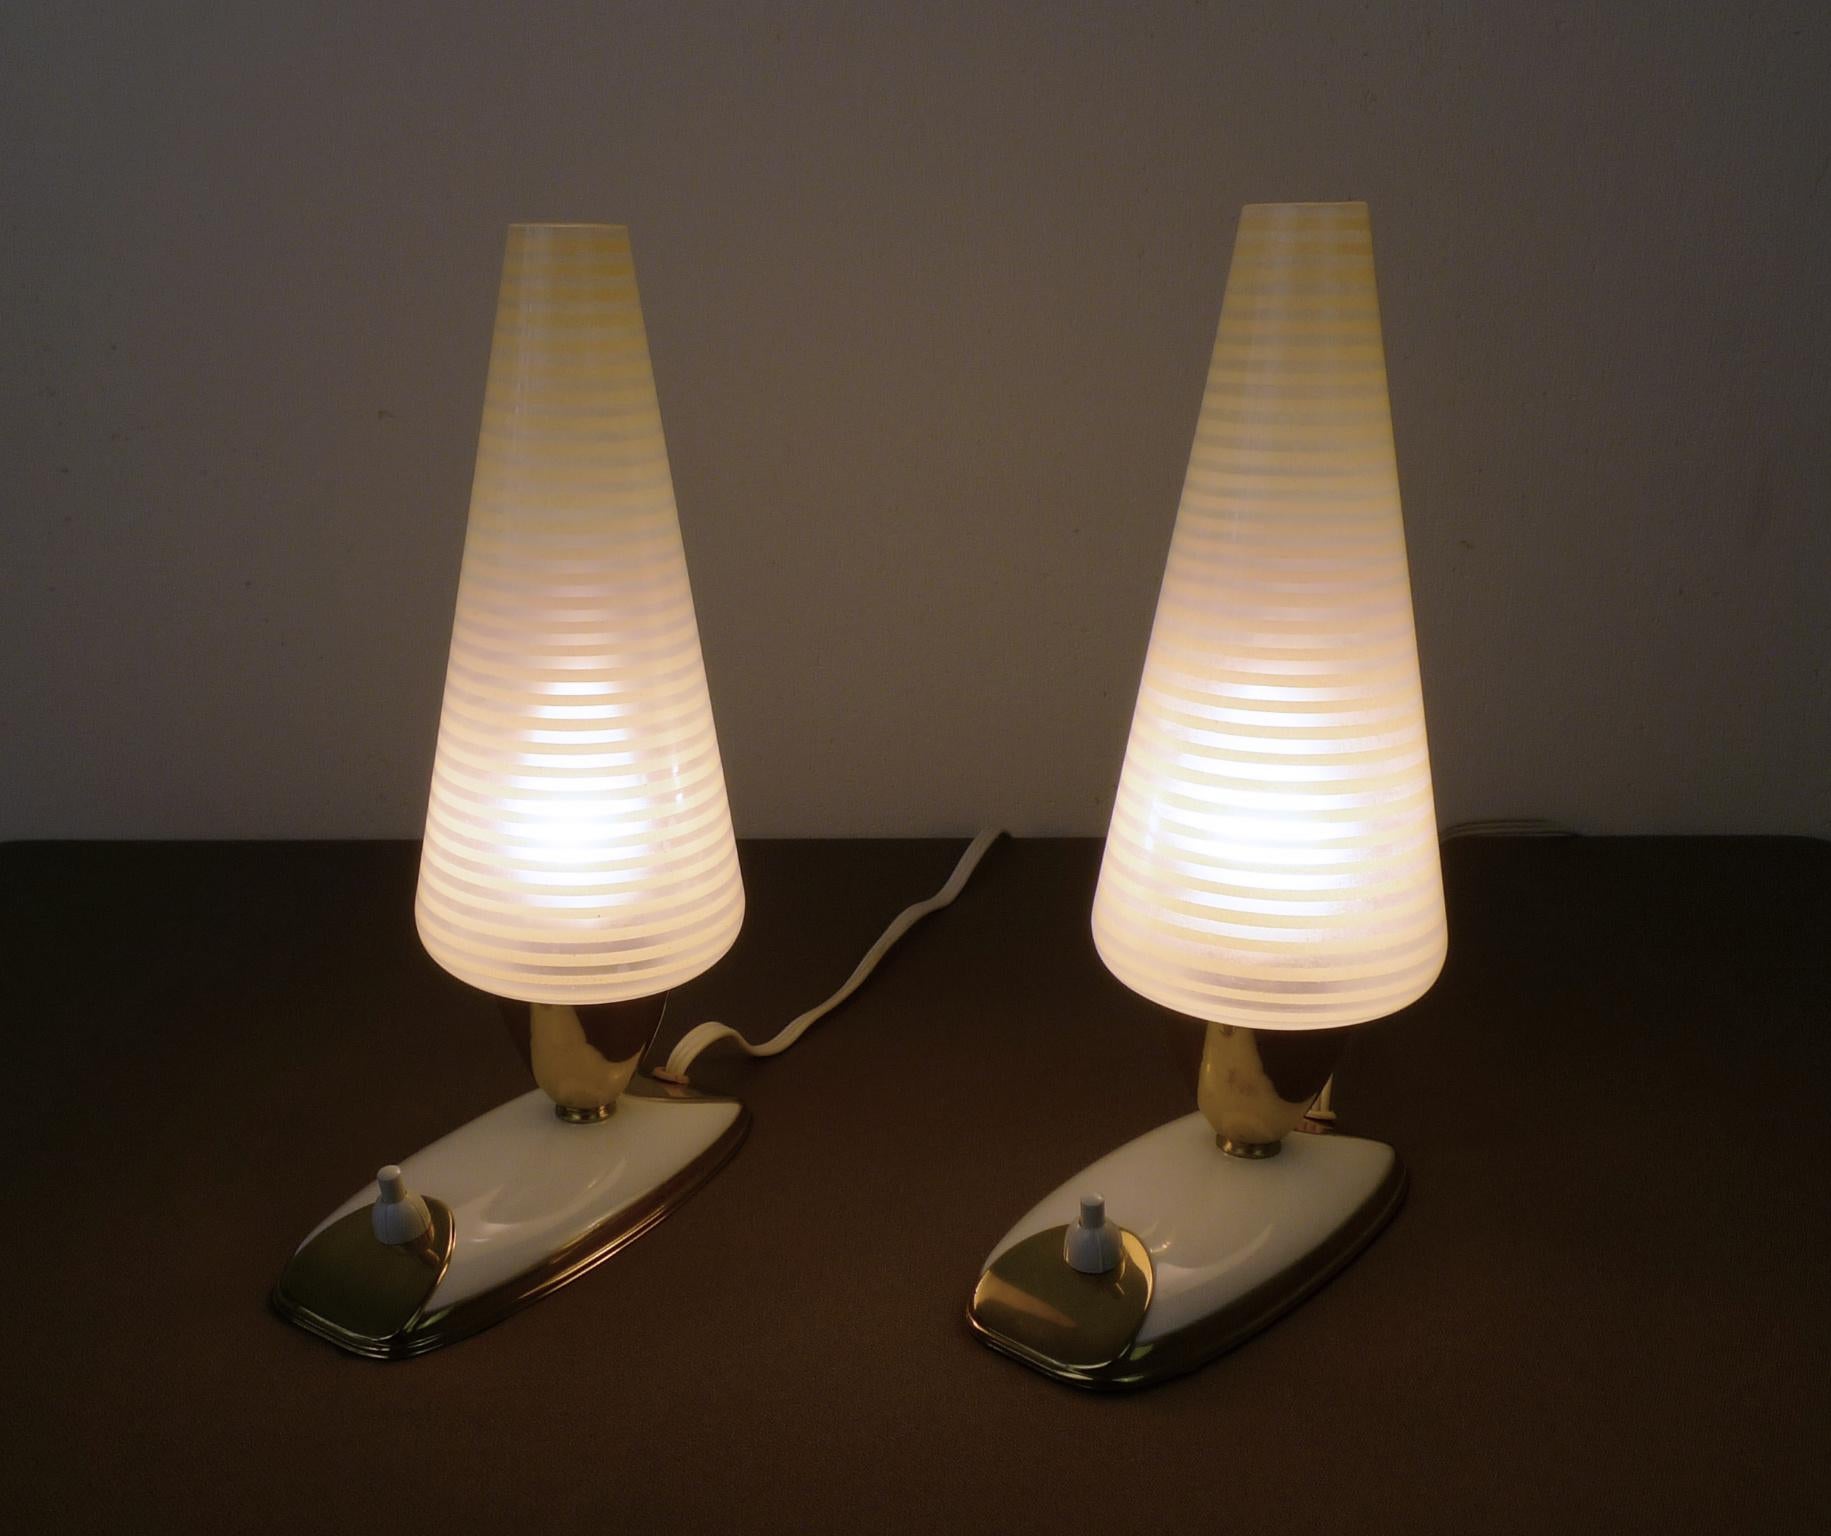 Pair of Table Lamps with Striped Glass Diffusers, Germany, 1950s For Sale 2